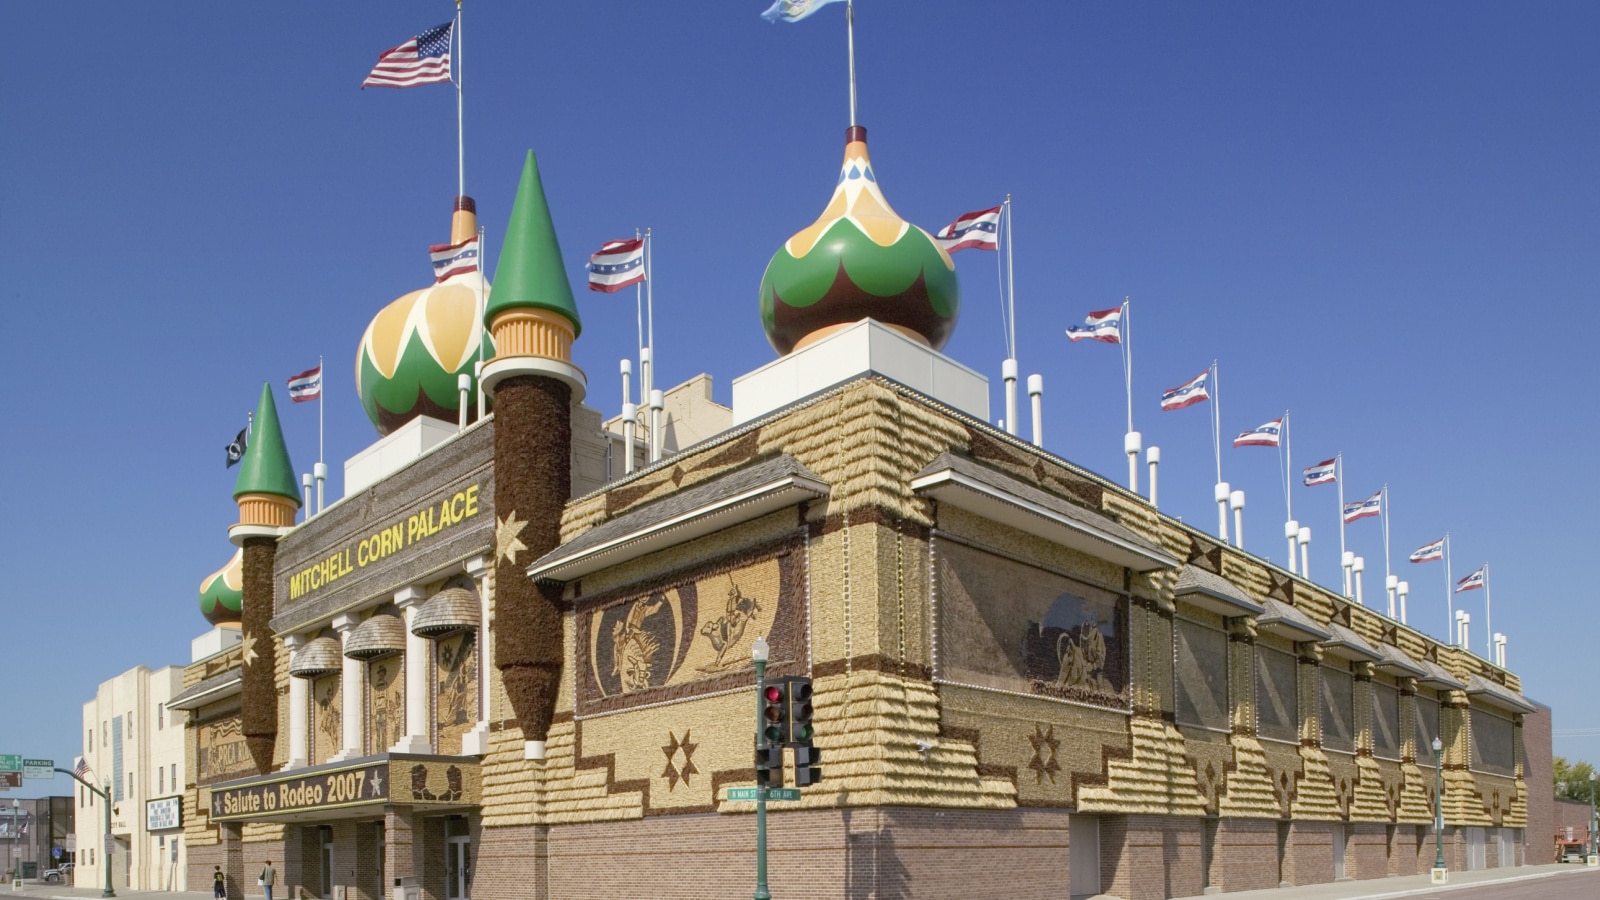 AUGUST 2007 - Main Street view of Corn Palace, Mitchell, South Dakota, originally built in 1892, and rebuilt in 1921.